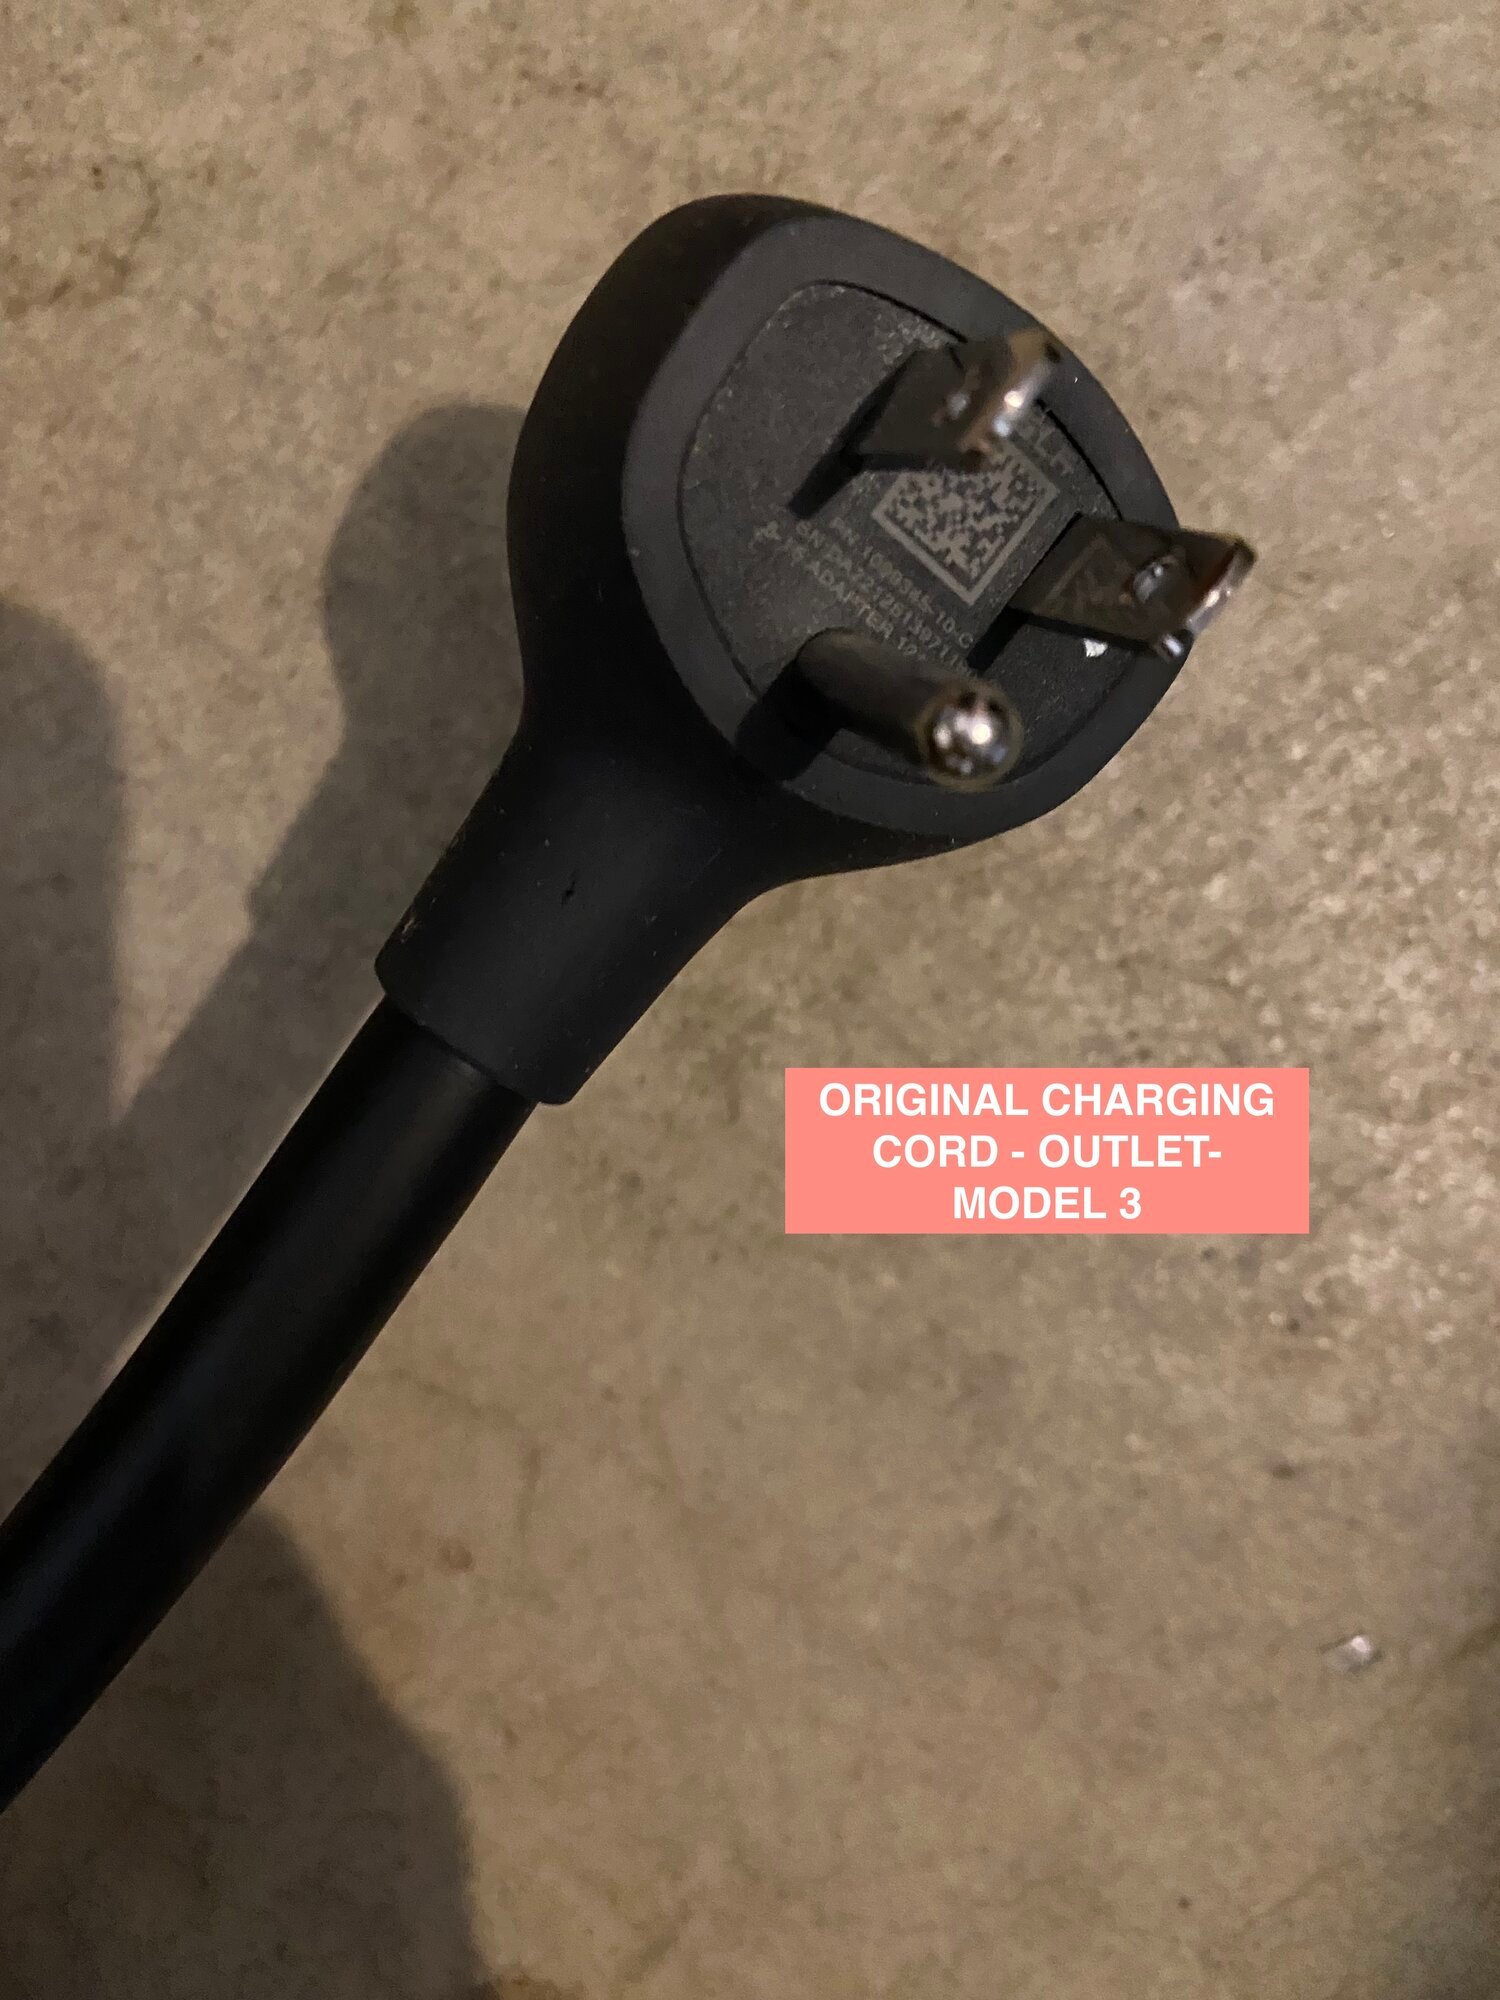 Connecting Gen 2 nema adapter to the charger | Tesla Motors Club